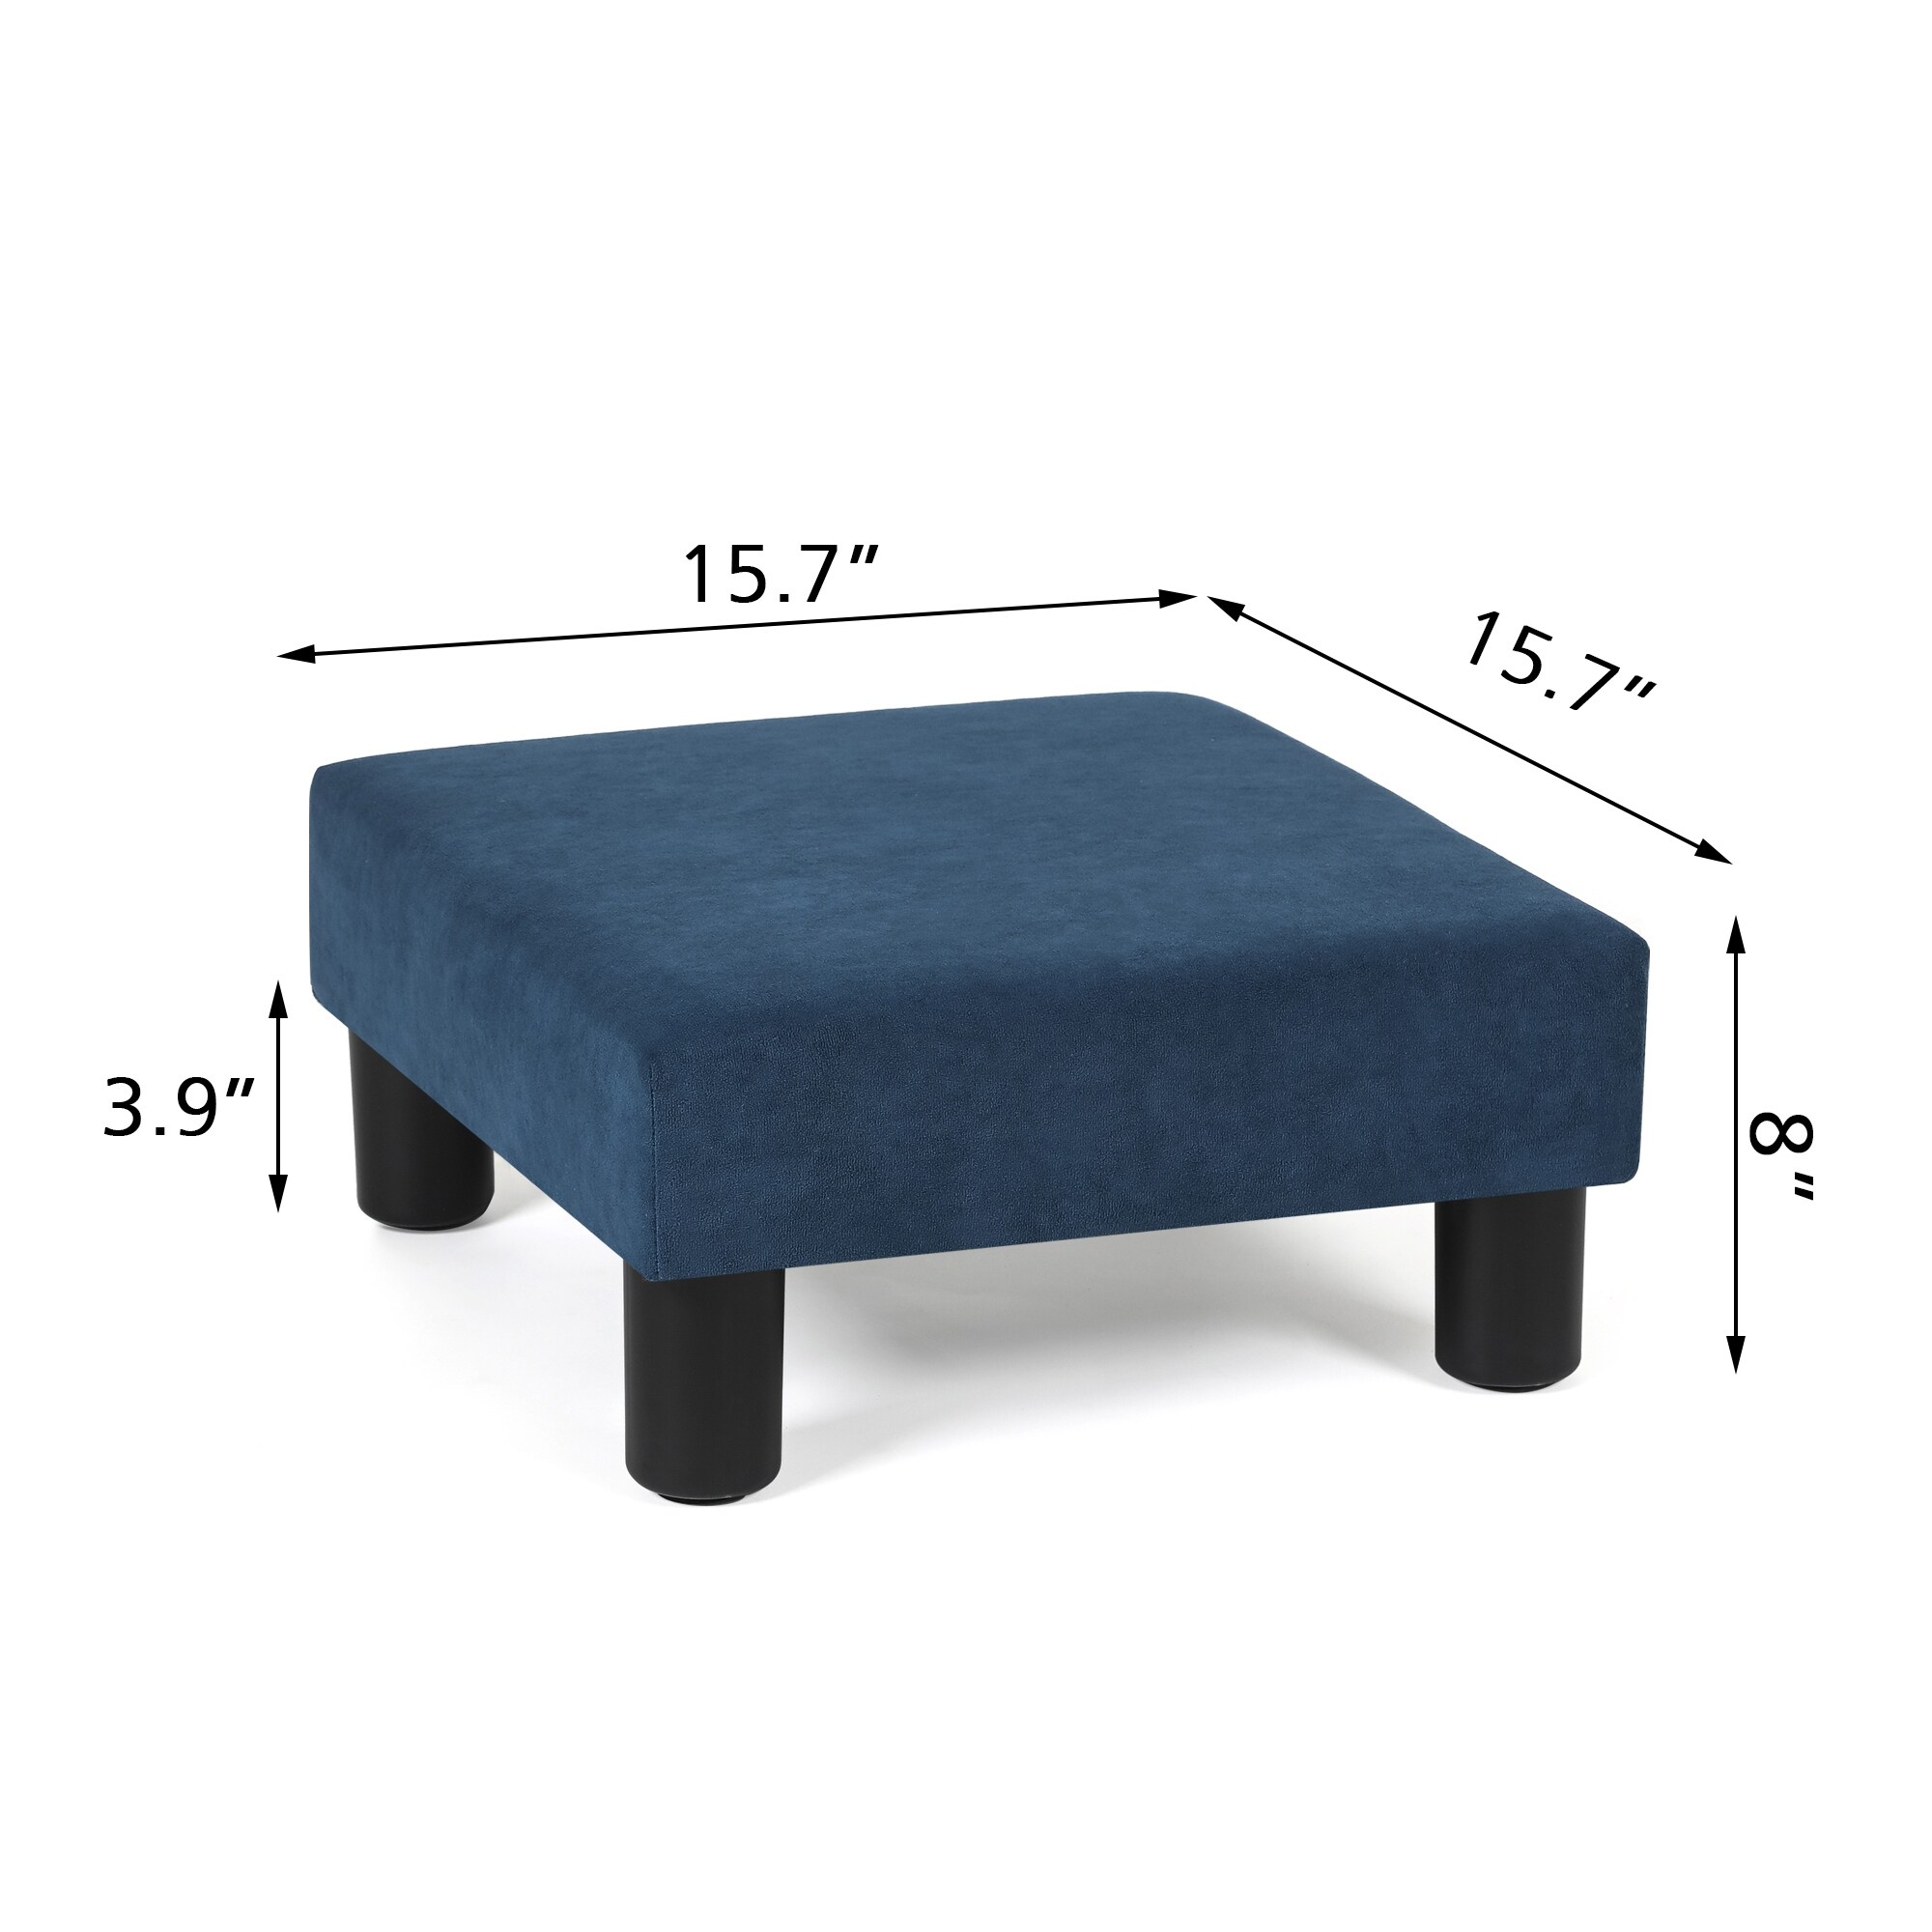 https://ak1.ostkcdn.com/images/products/is/images/direct/daaae1023aa21780b29fe7bb99b129f4eb737404/Adeco-Small-Ottoman-Upholstered-Footrest-Pet-Steps-Dog-Stairs-Stool.jpg